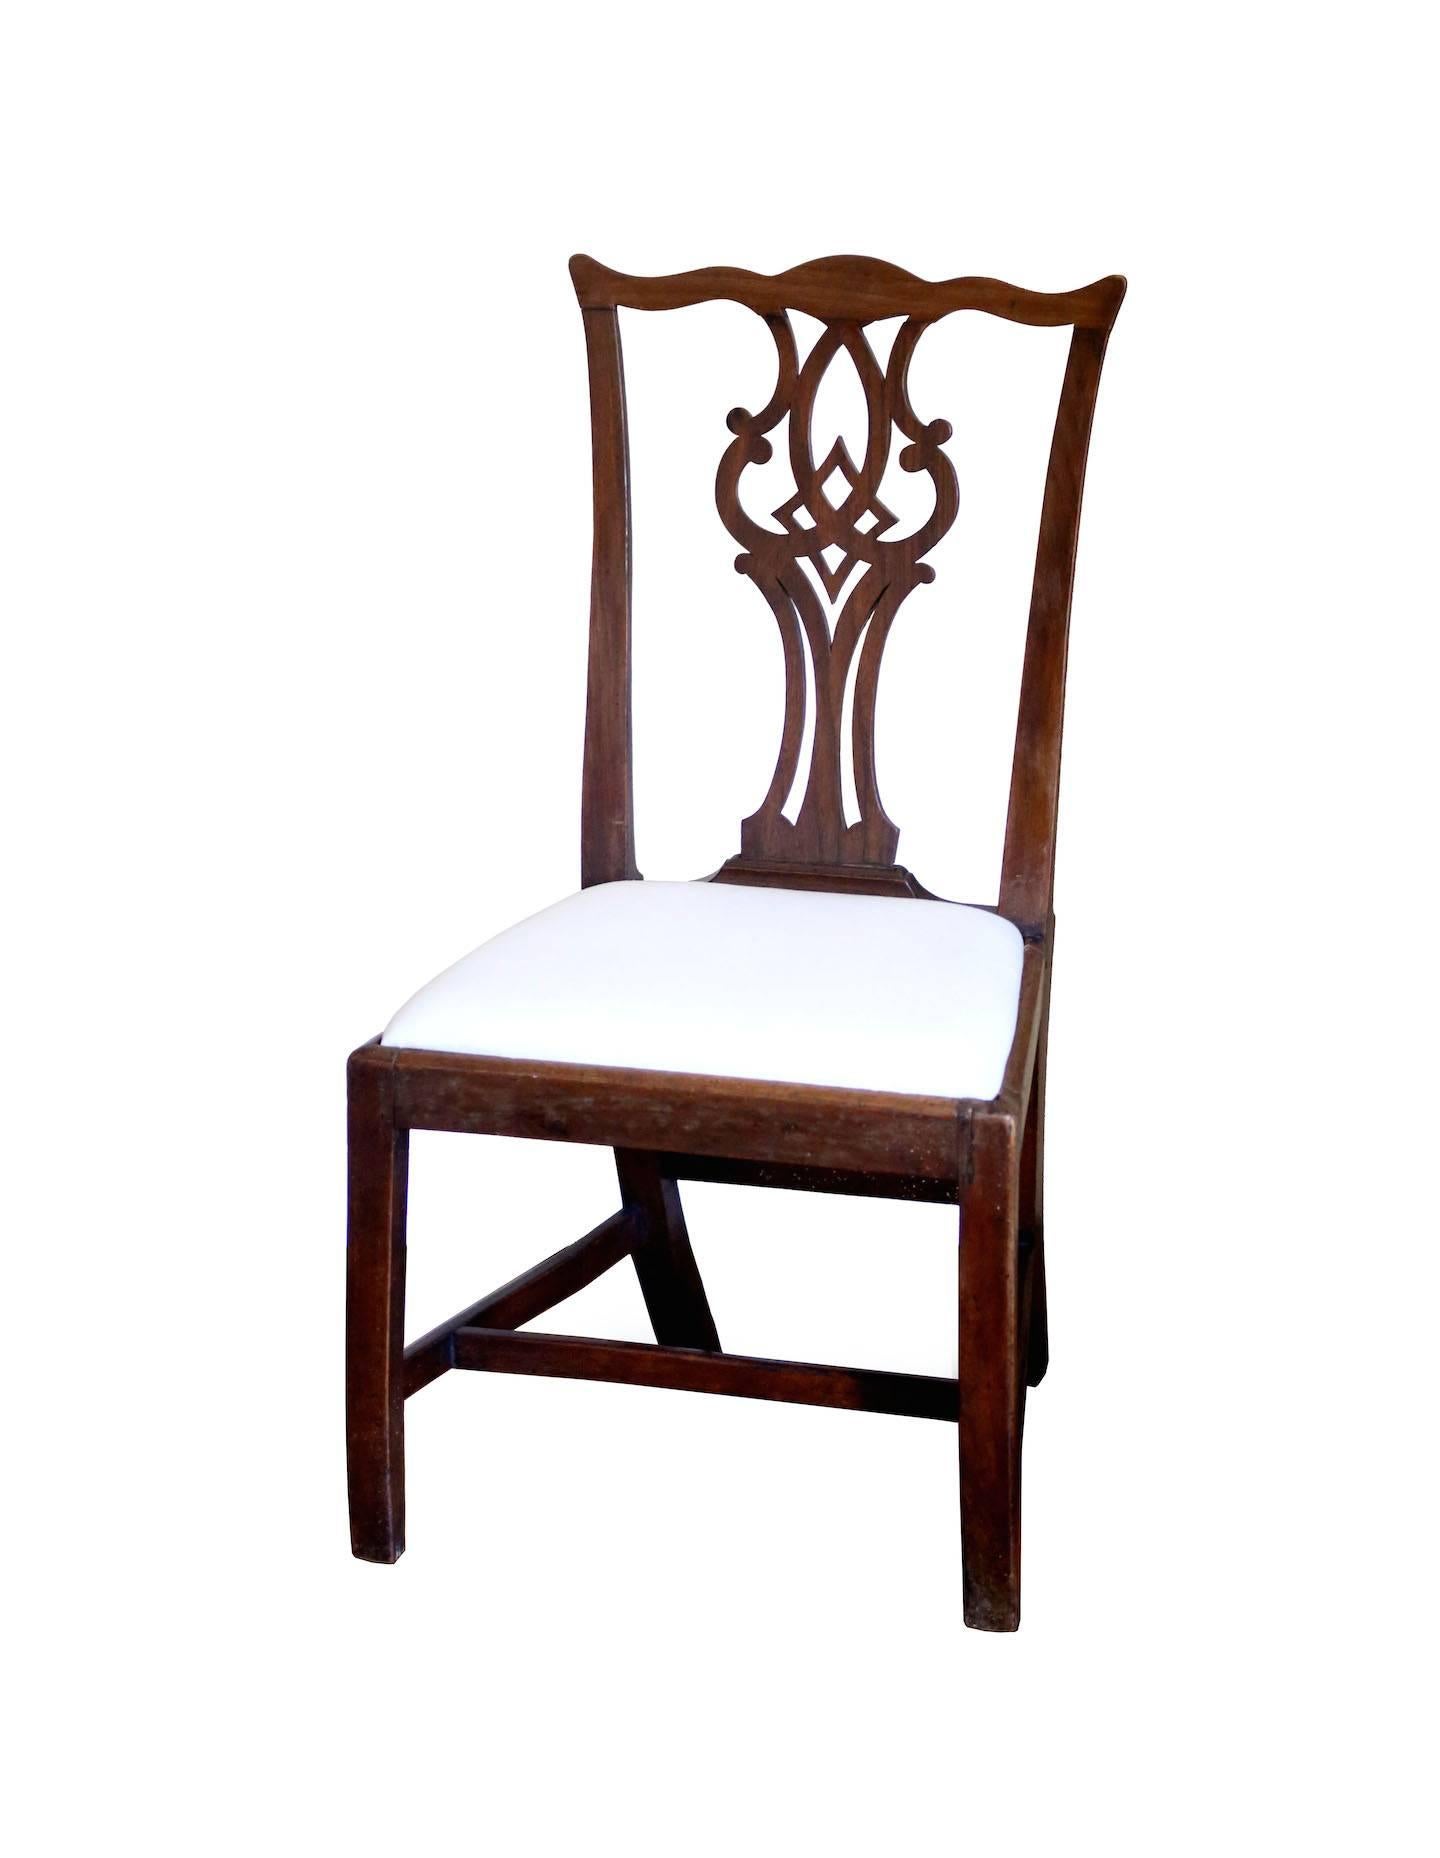 Two very attractive walnut chairs, with serpentine crest rail, square legs. The beautiful pierced backsplat features C curves and interlocking diamond. Rose head nails support corner brackets for the drop seats, which are presented in muslin